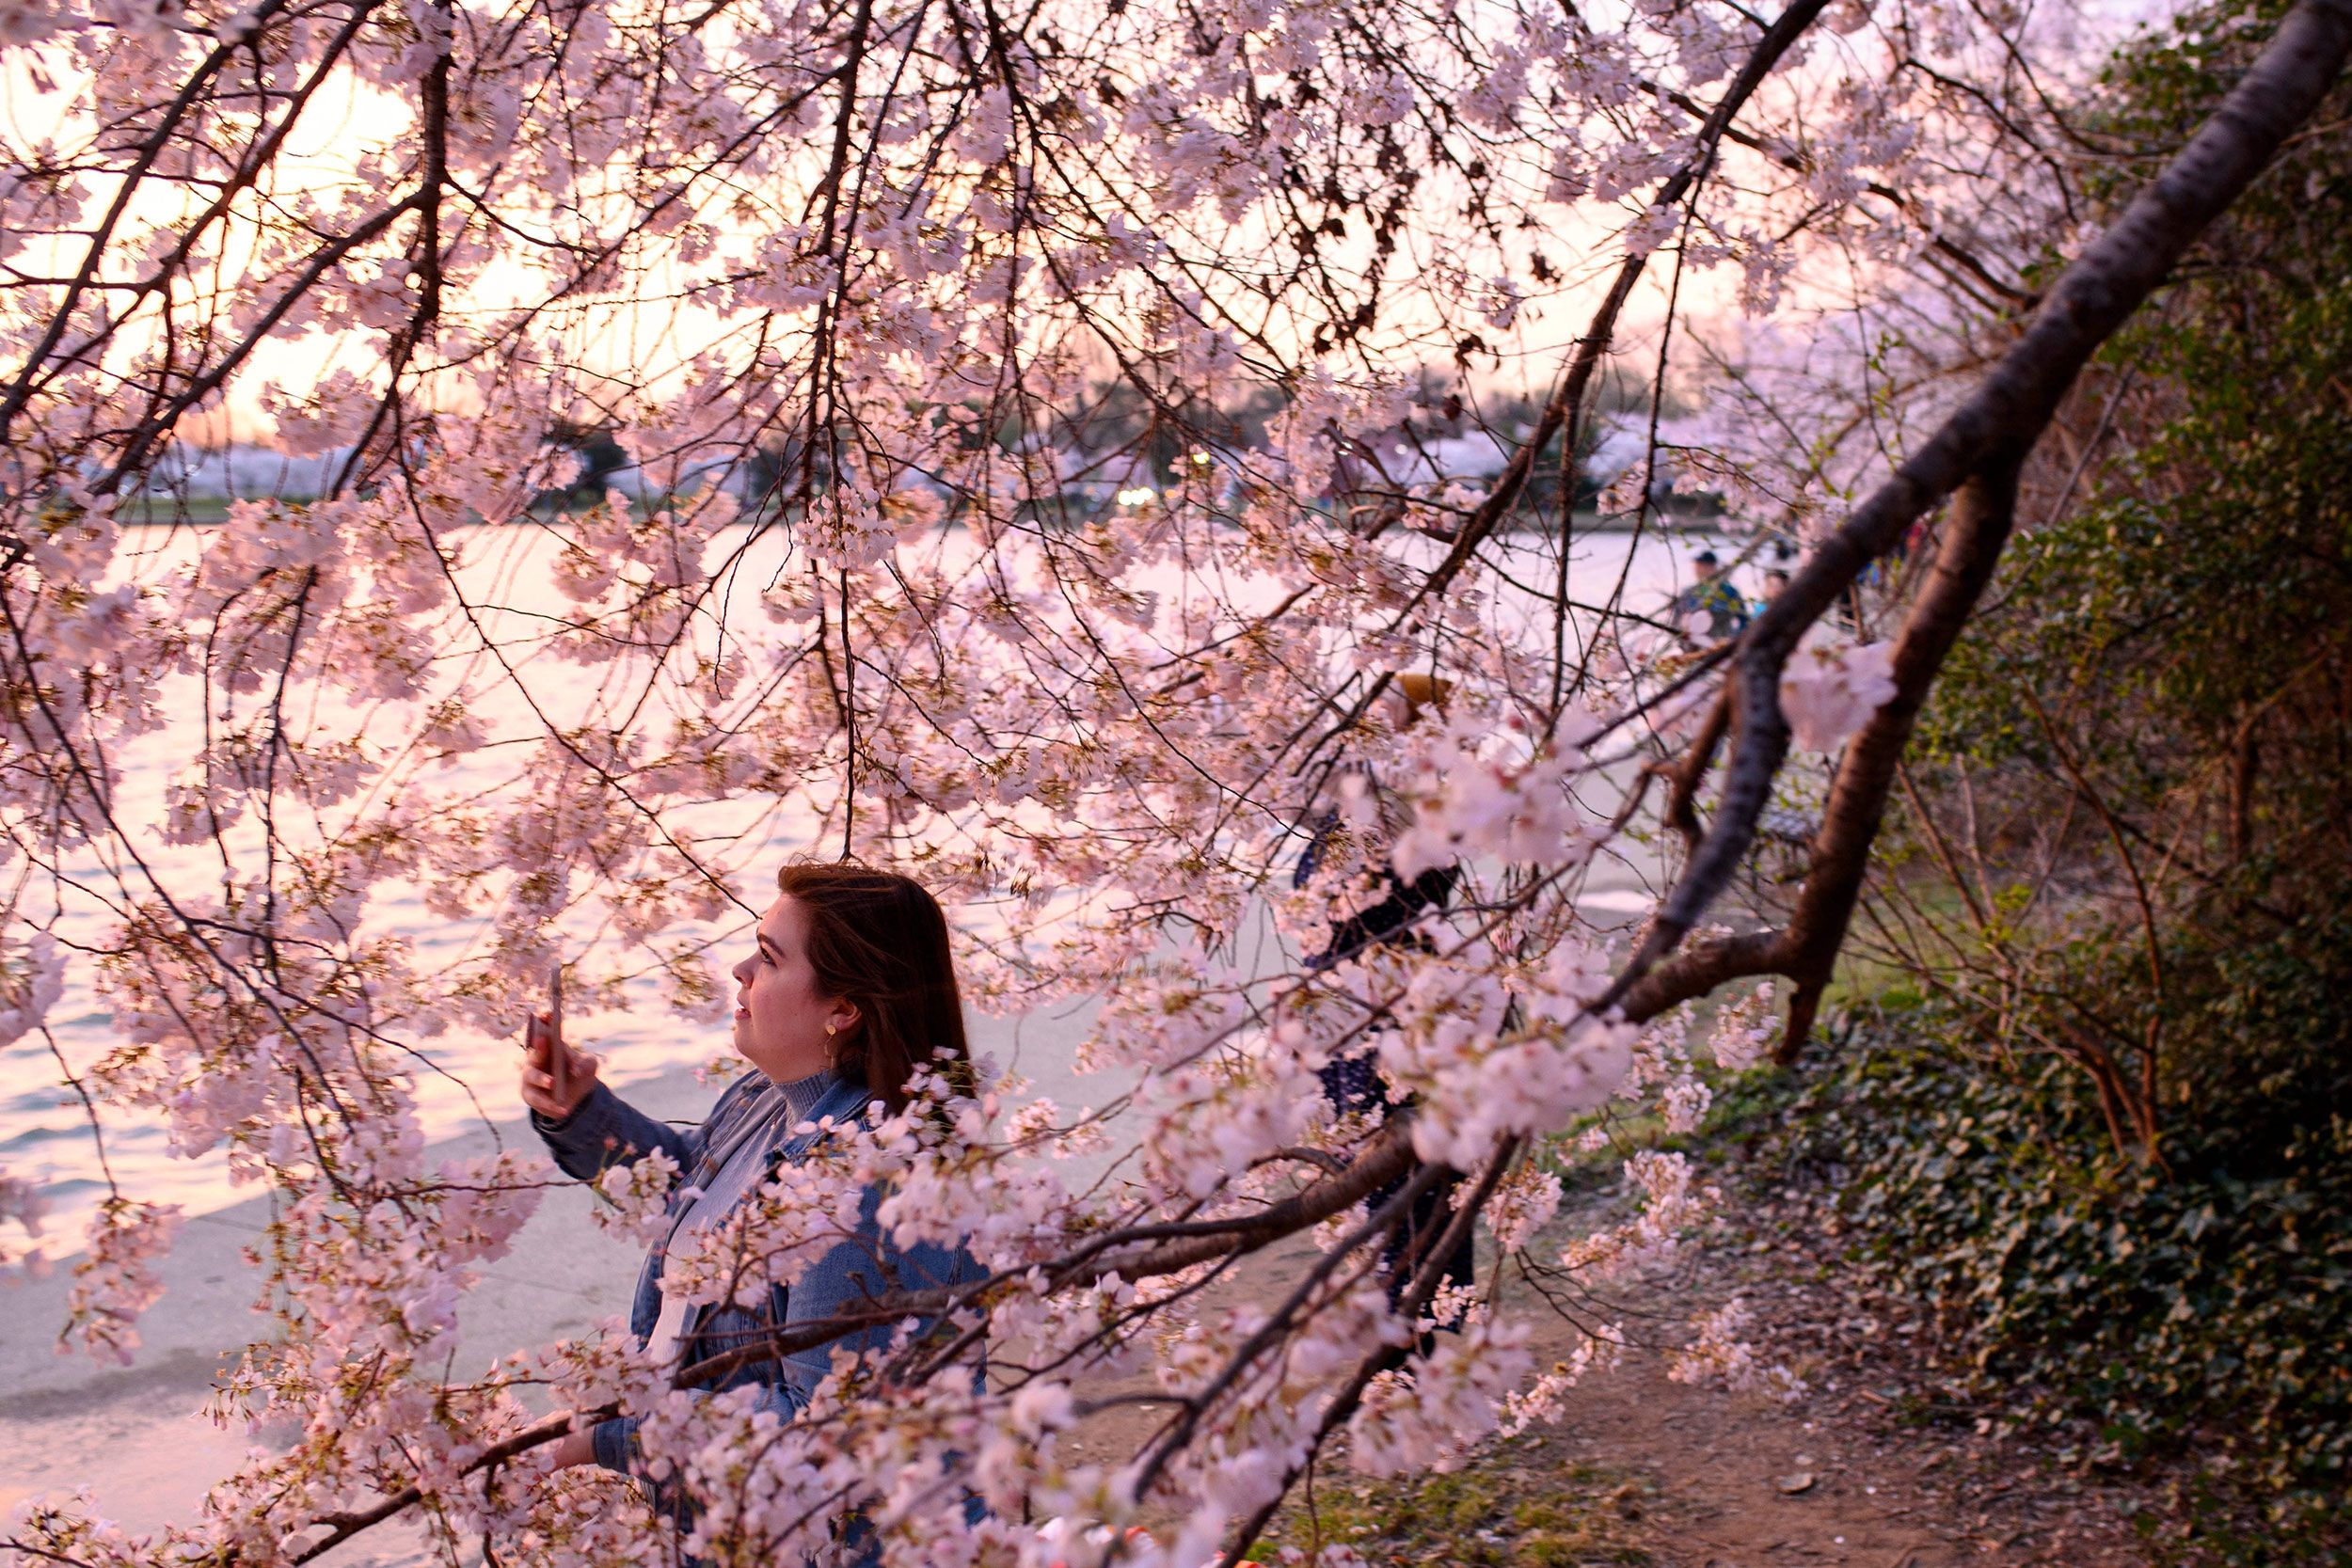 Here's When Washington, D.C. Cherry Blossoms Will Be at Their Peak